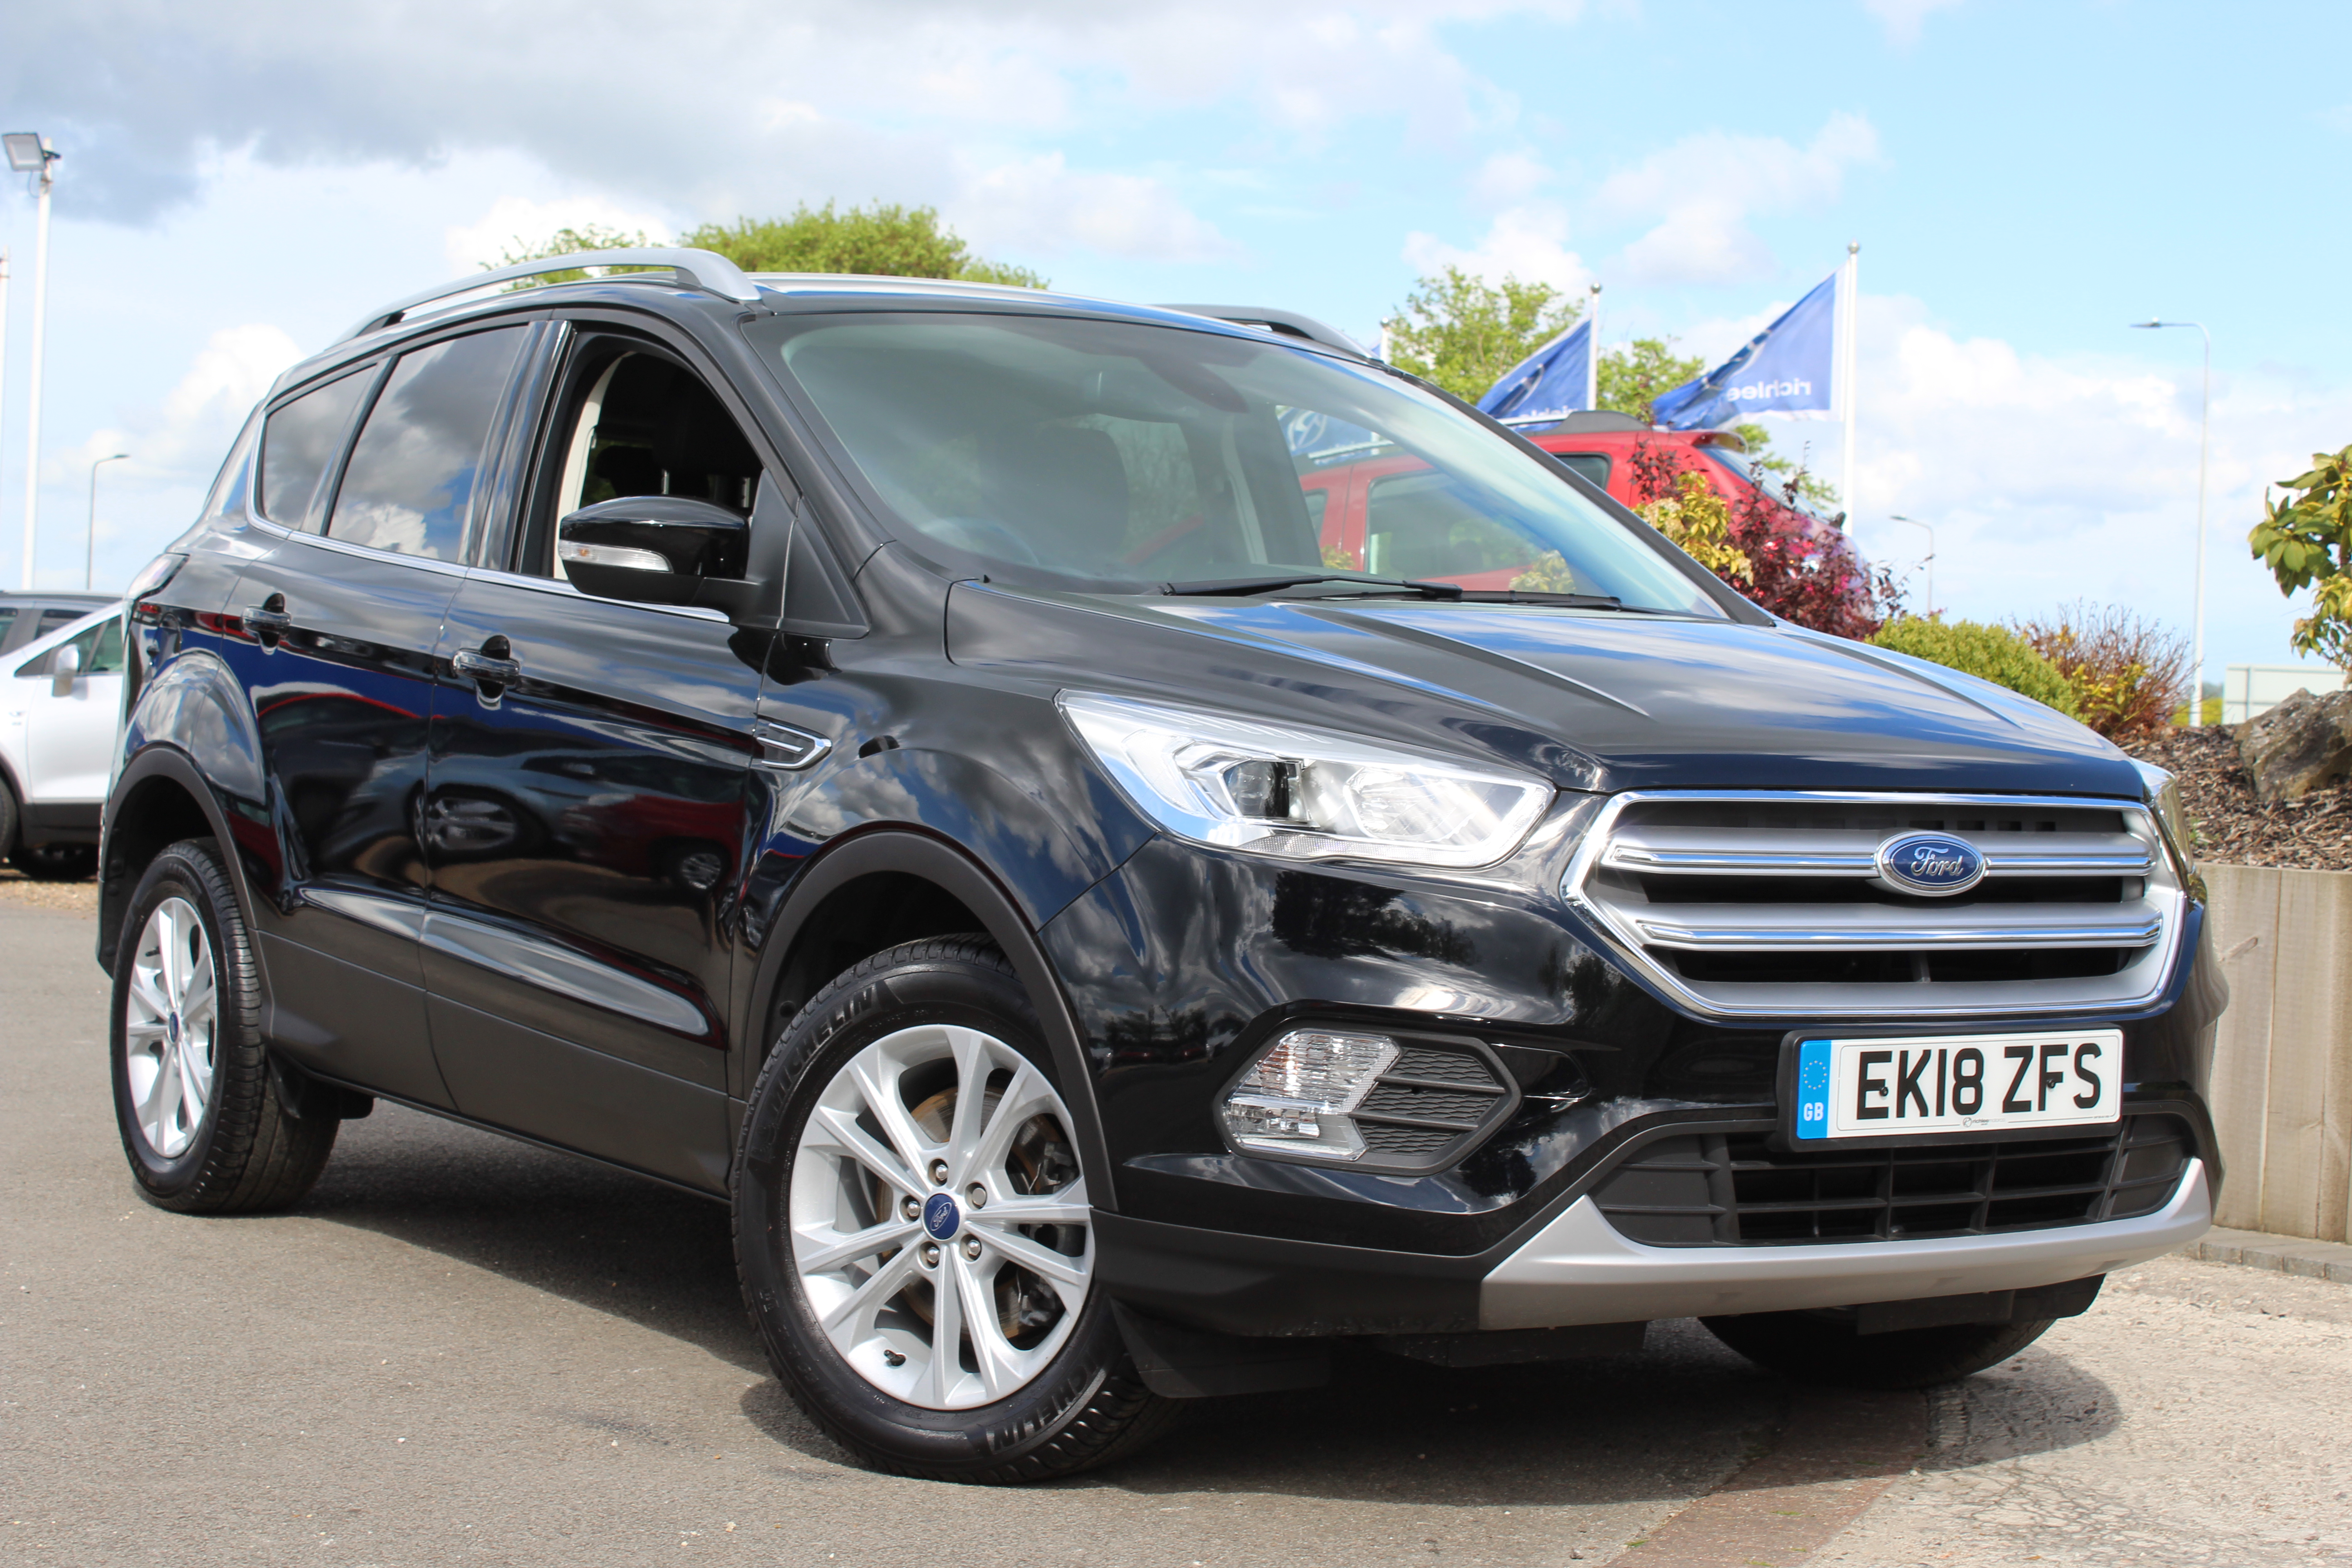 FORD KUGA 2.0 TDCi Titanium 5dr 2WD For Sale Richlee